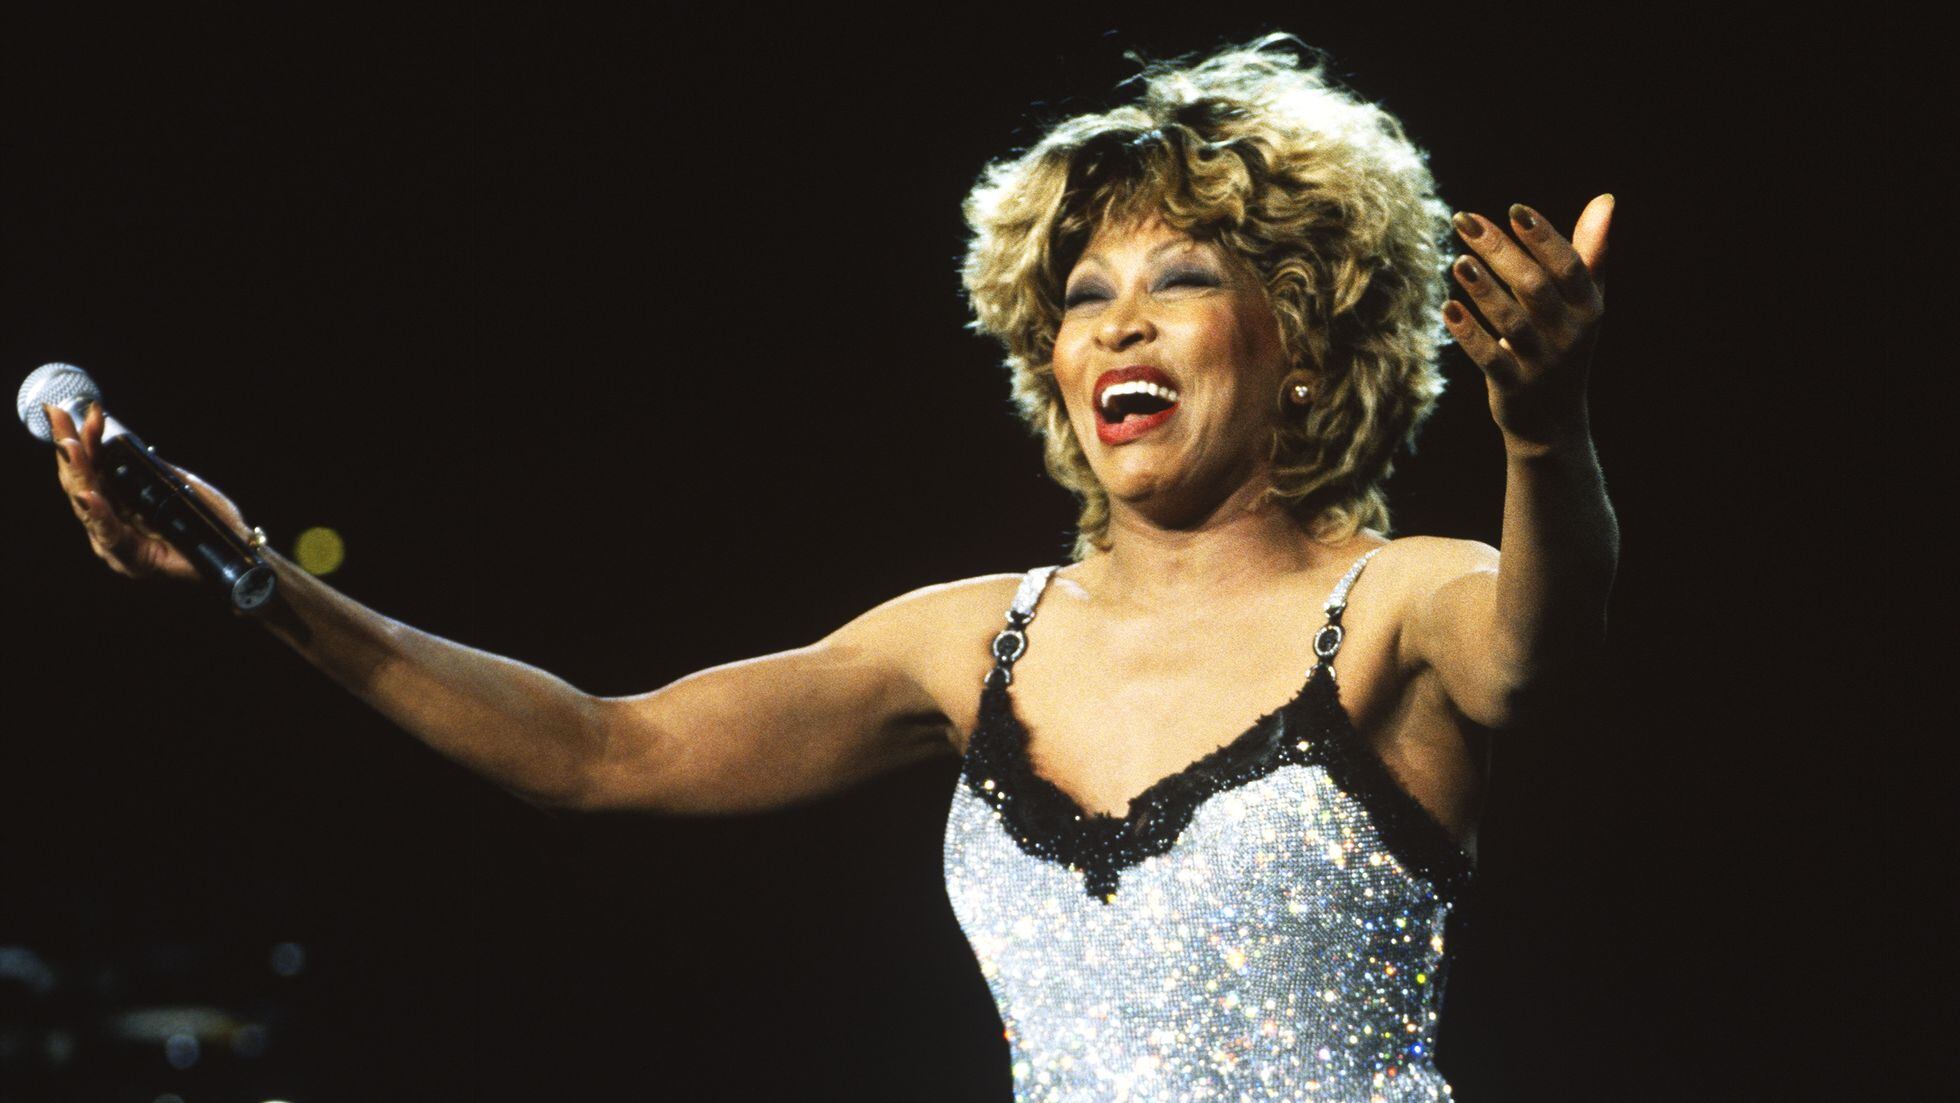 Tina Turner, the 'queen of rock', dies at 83 years old | Culture